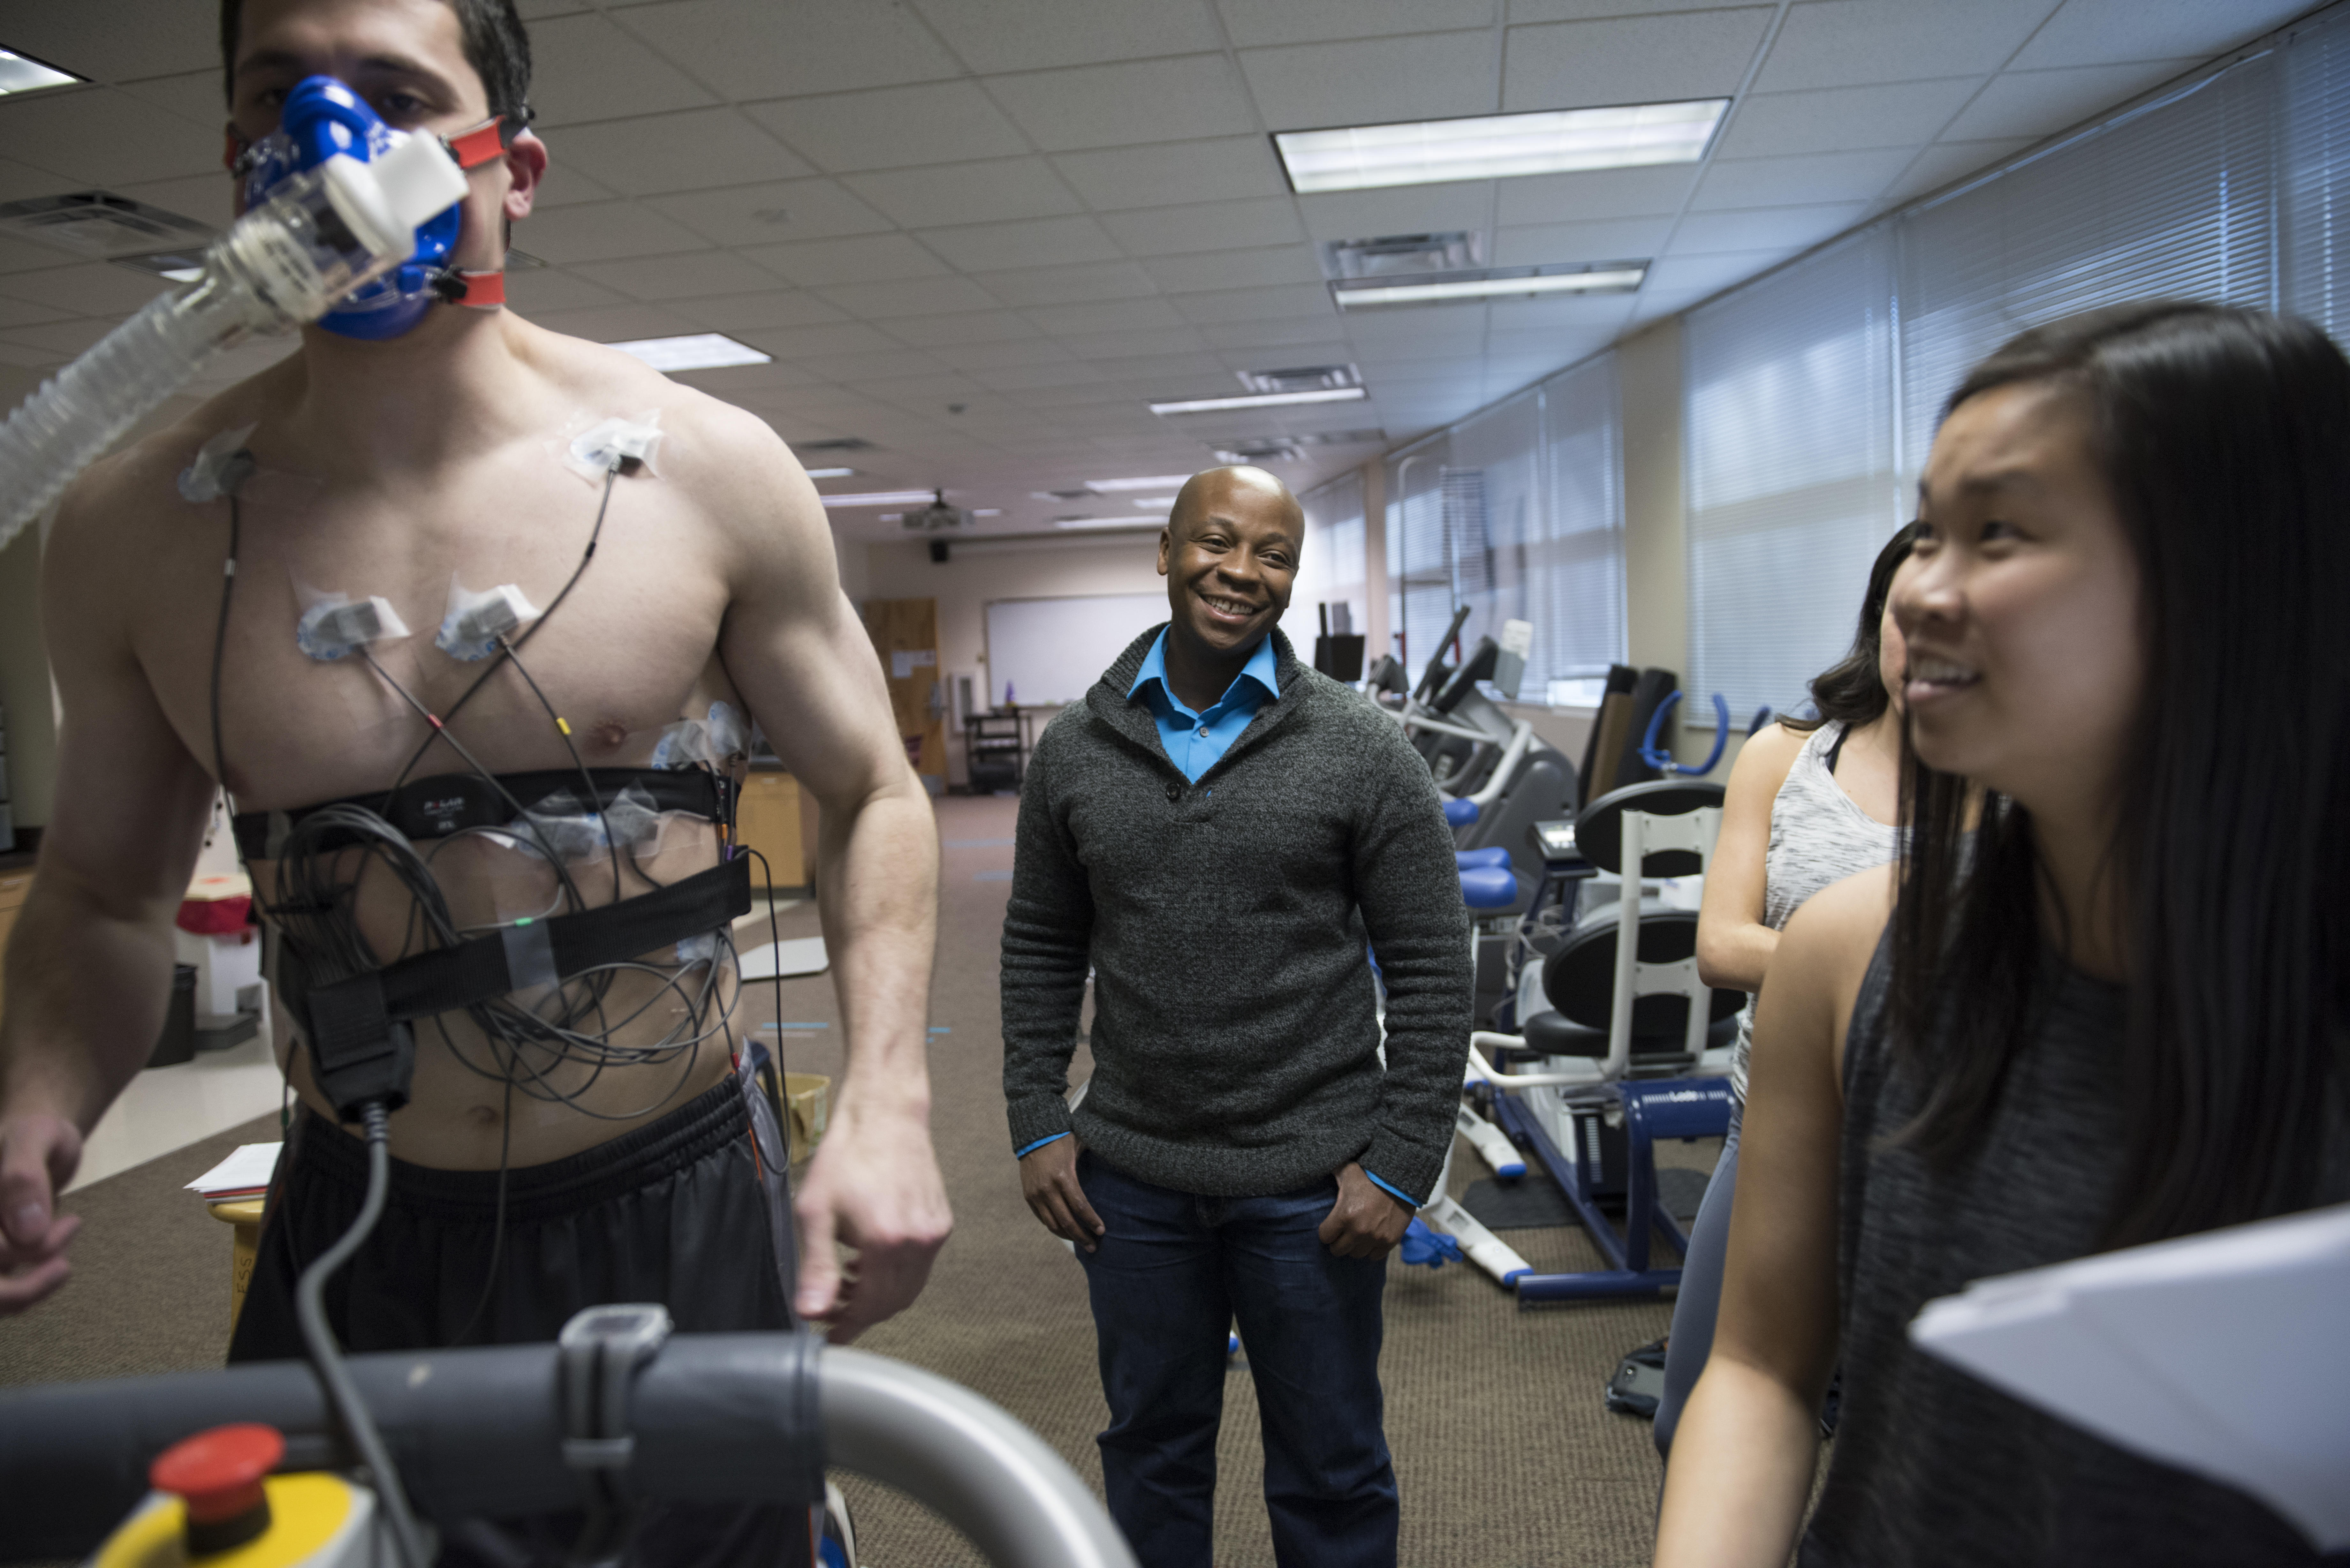 MARCH 14, 2018: Students in assistant professor of exercise science Titch Madzima's exercise science laboratory perform various tests, including a jump test and a VO2 max test, which tests oxygen usage during exercise. (photo by Kim Walker)